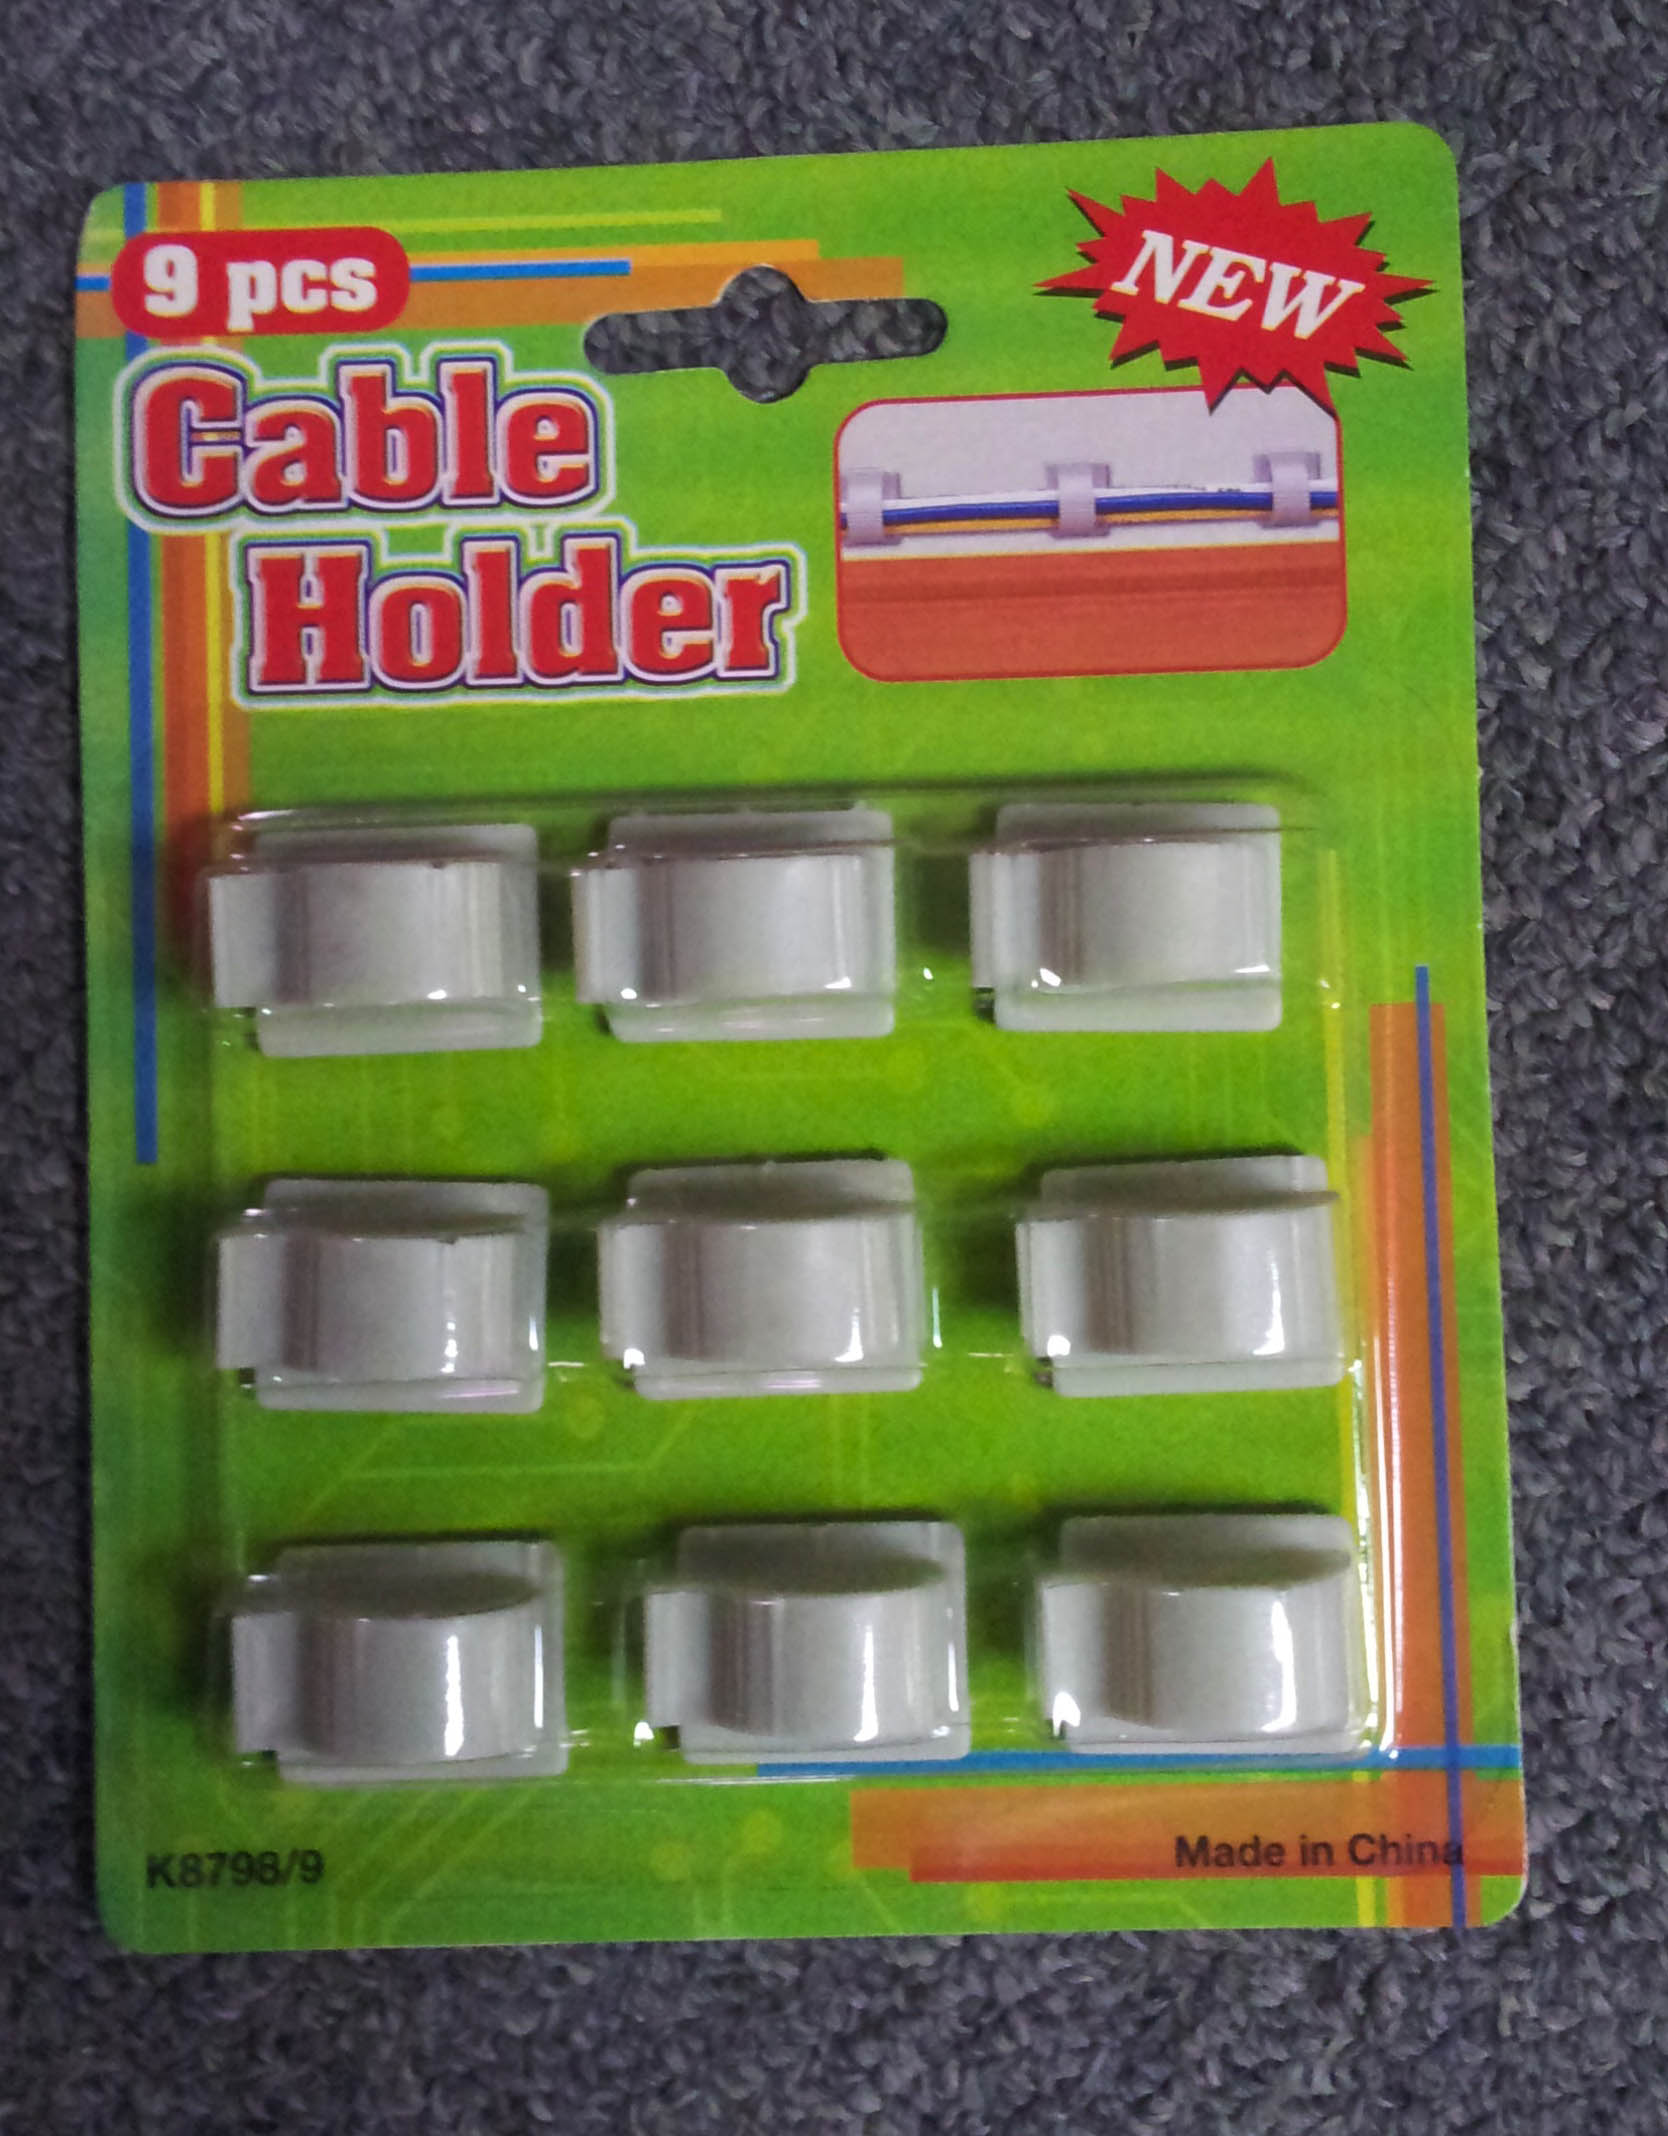 K8798/9 CABLE HOLDER